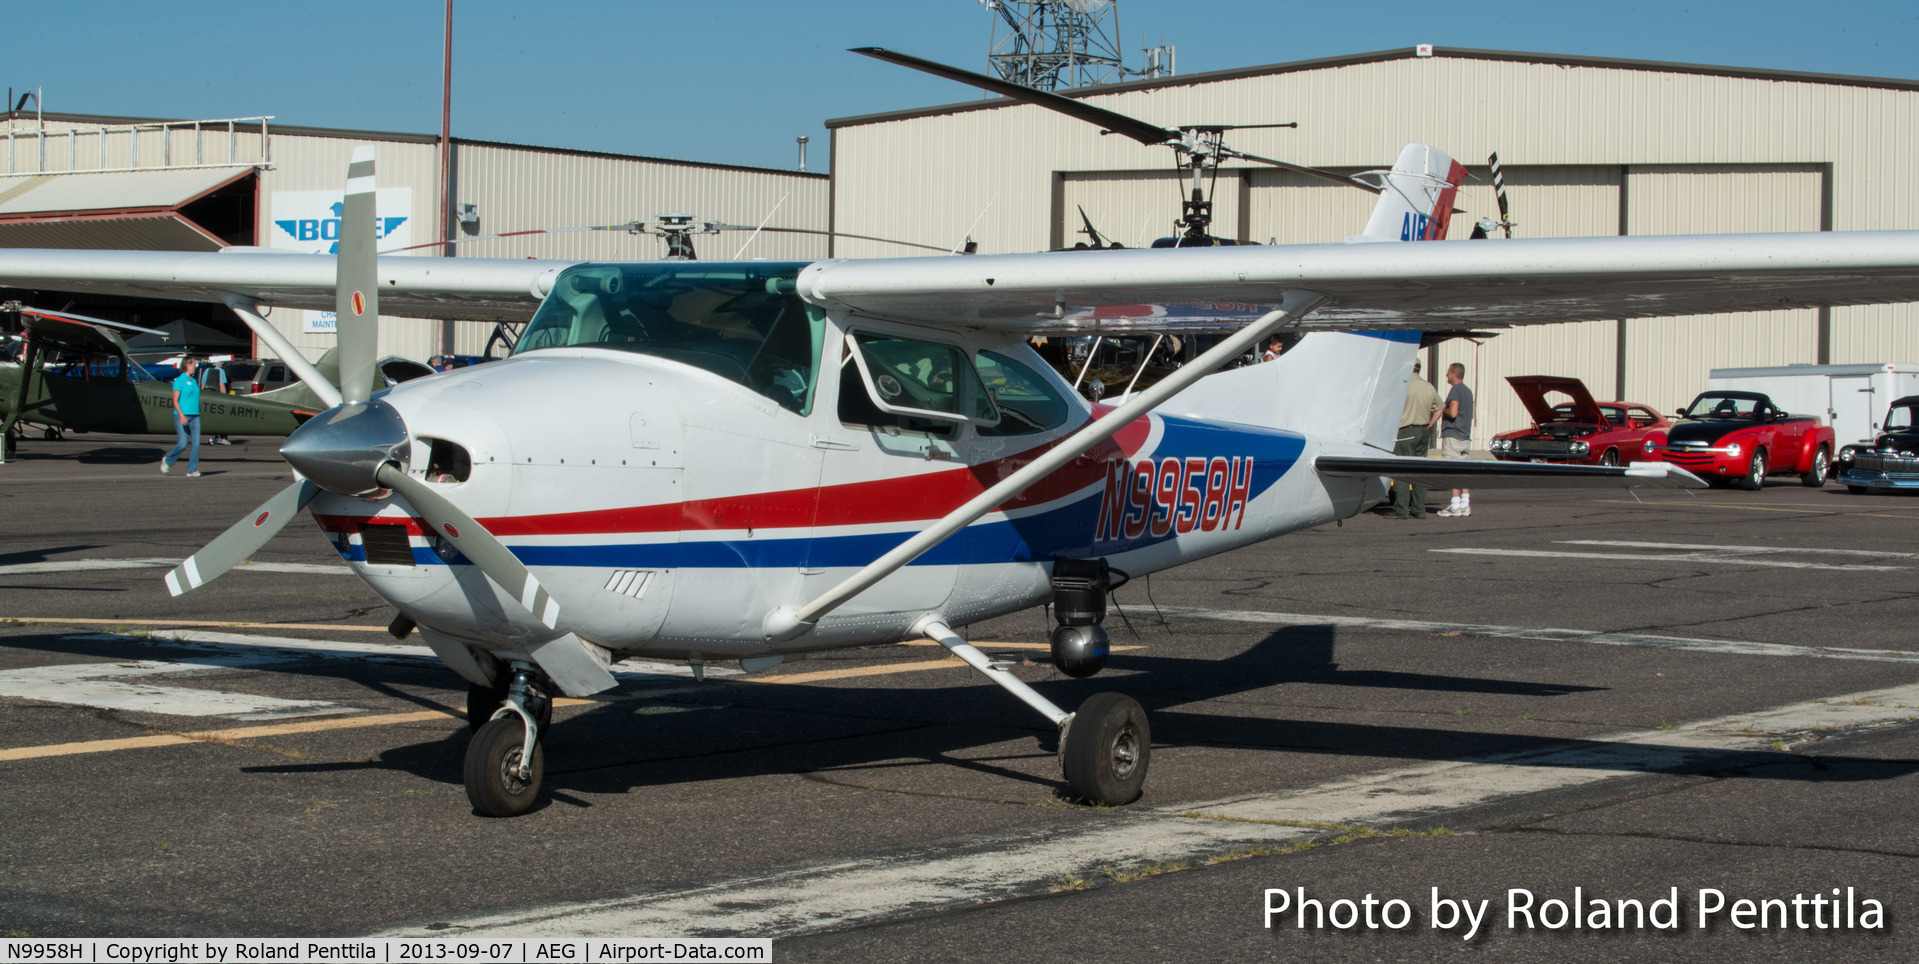 N9958H, 1981 Cessna 182R Skylane C/N 18268143, Owned by the Albuquerque Police Department for aerial surveillance.